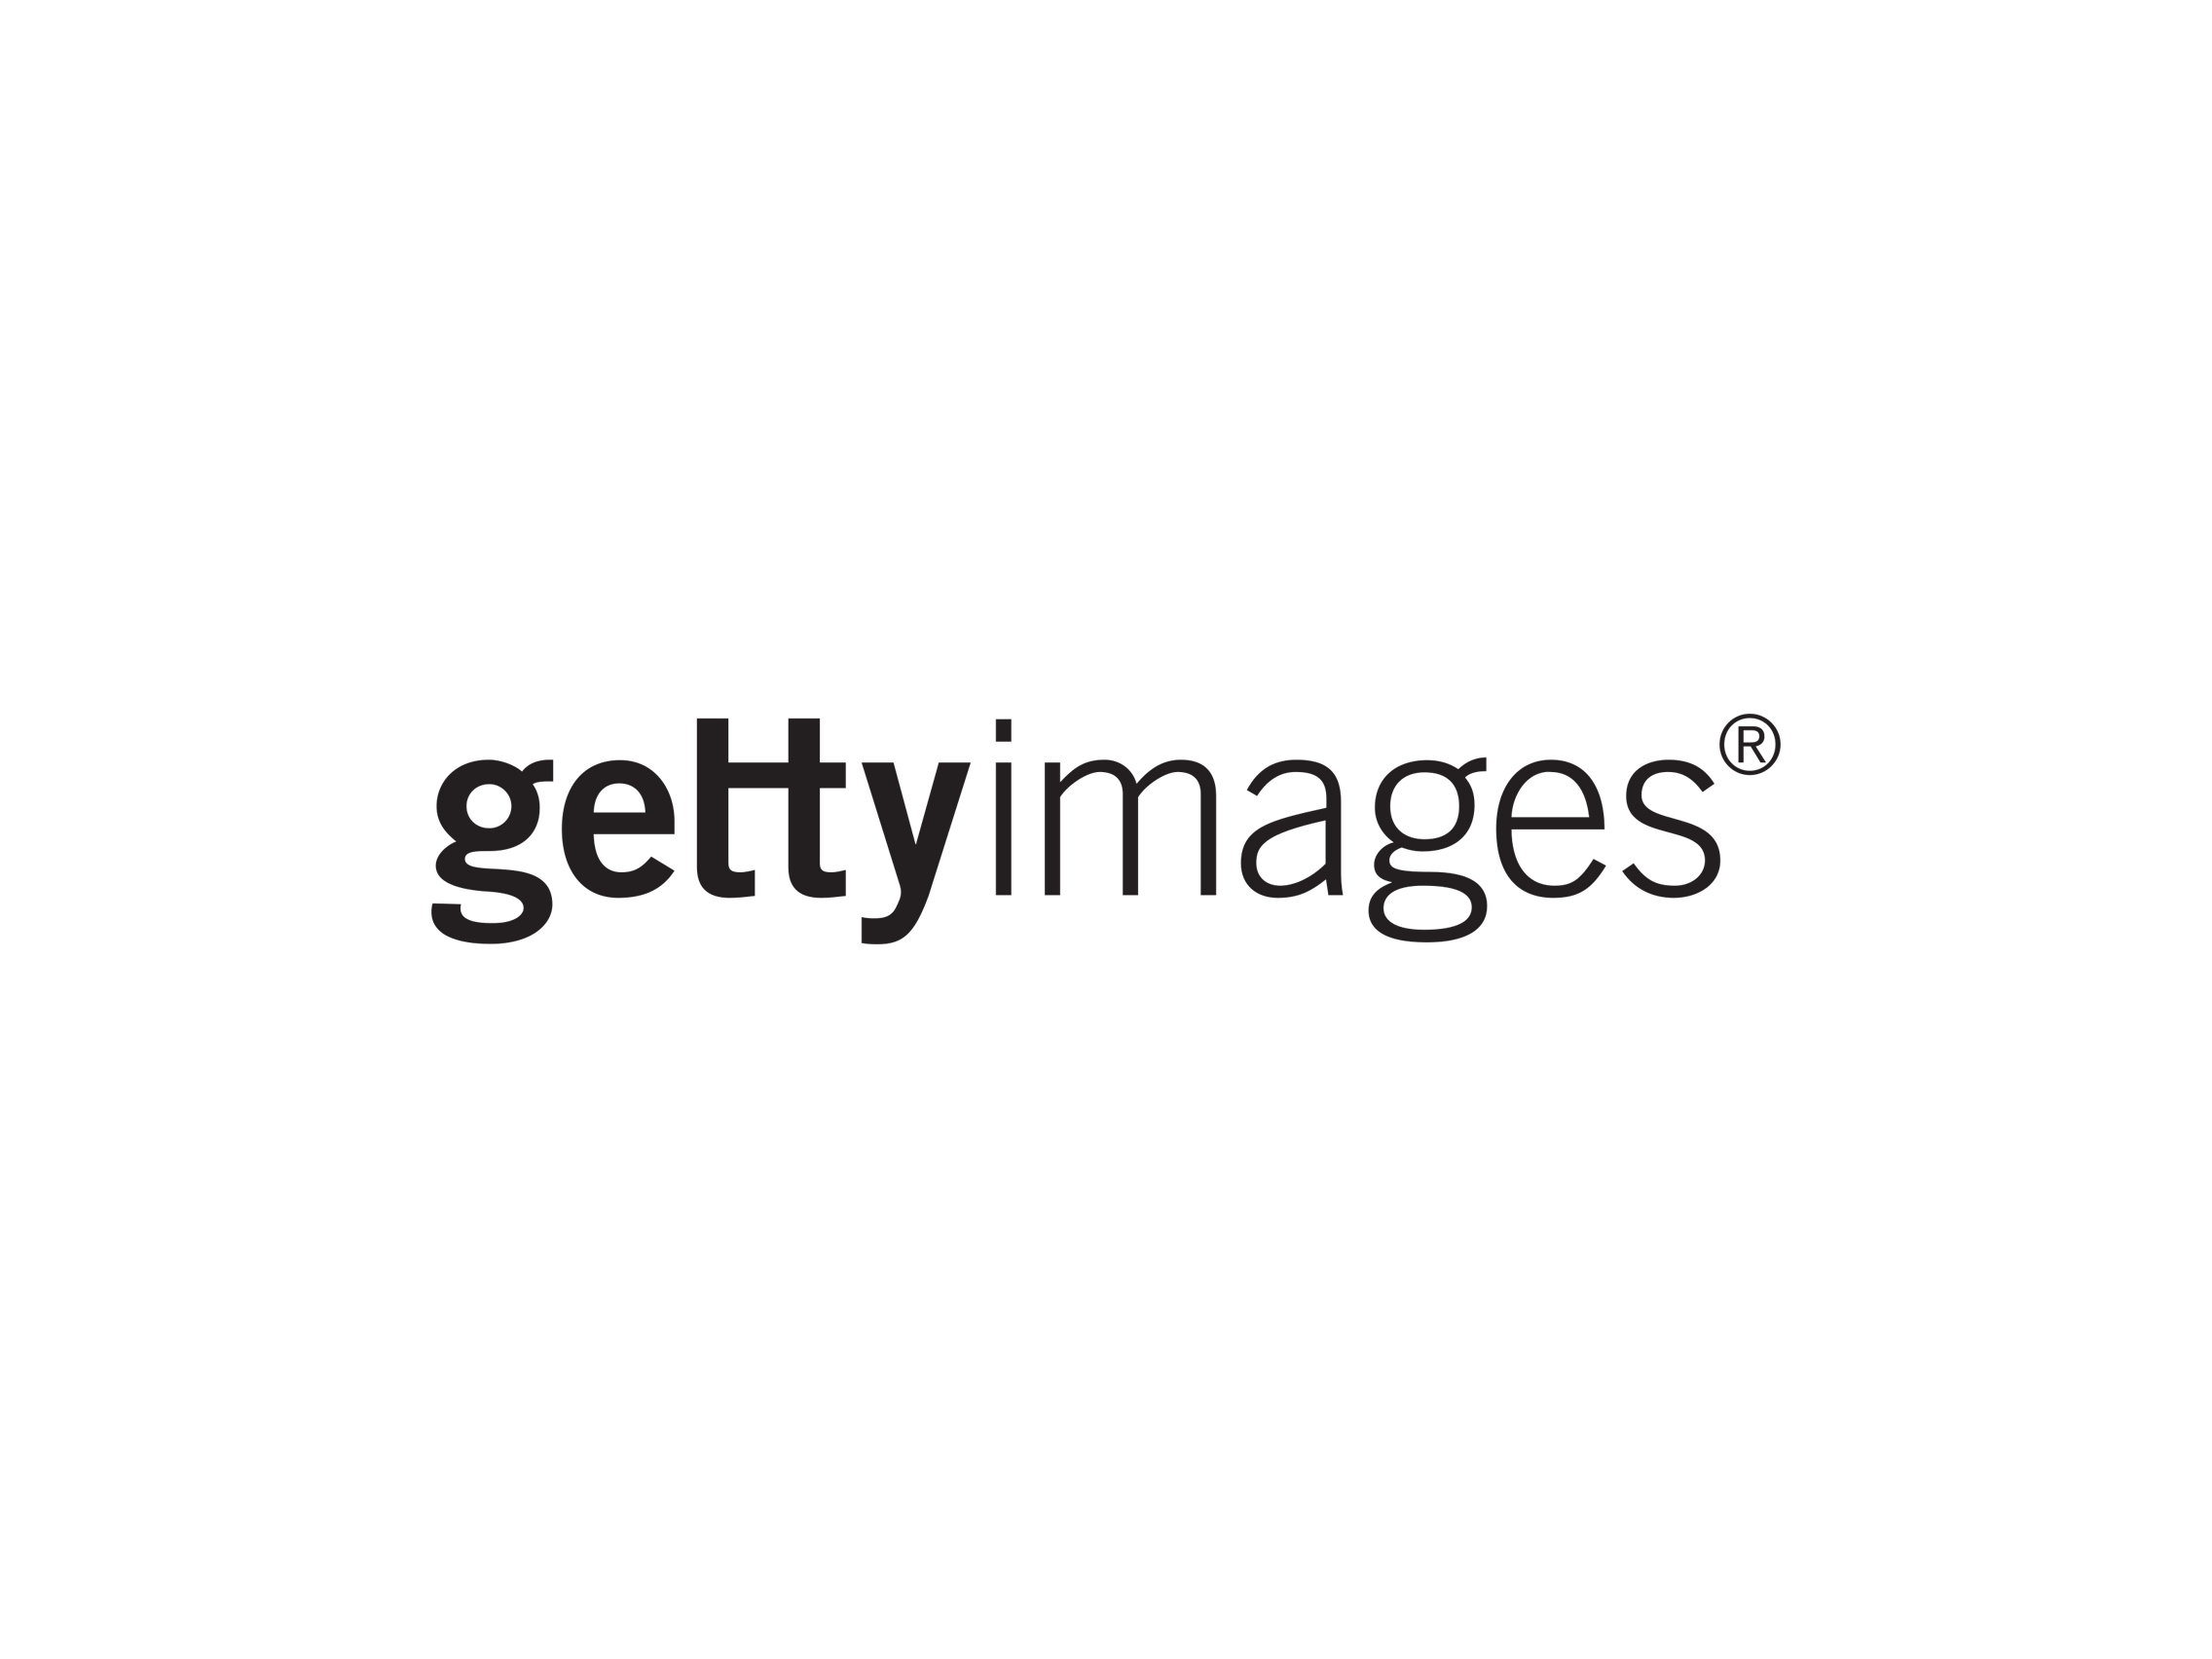 Getty-Images-logo